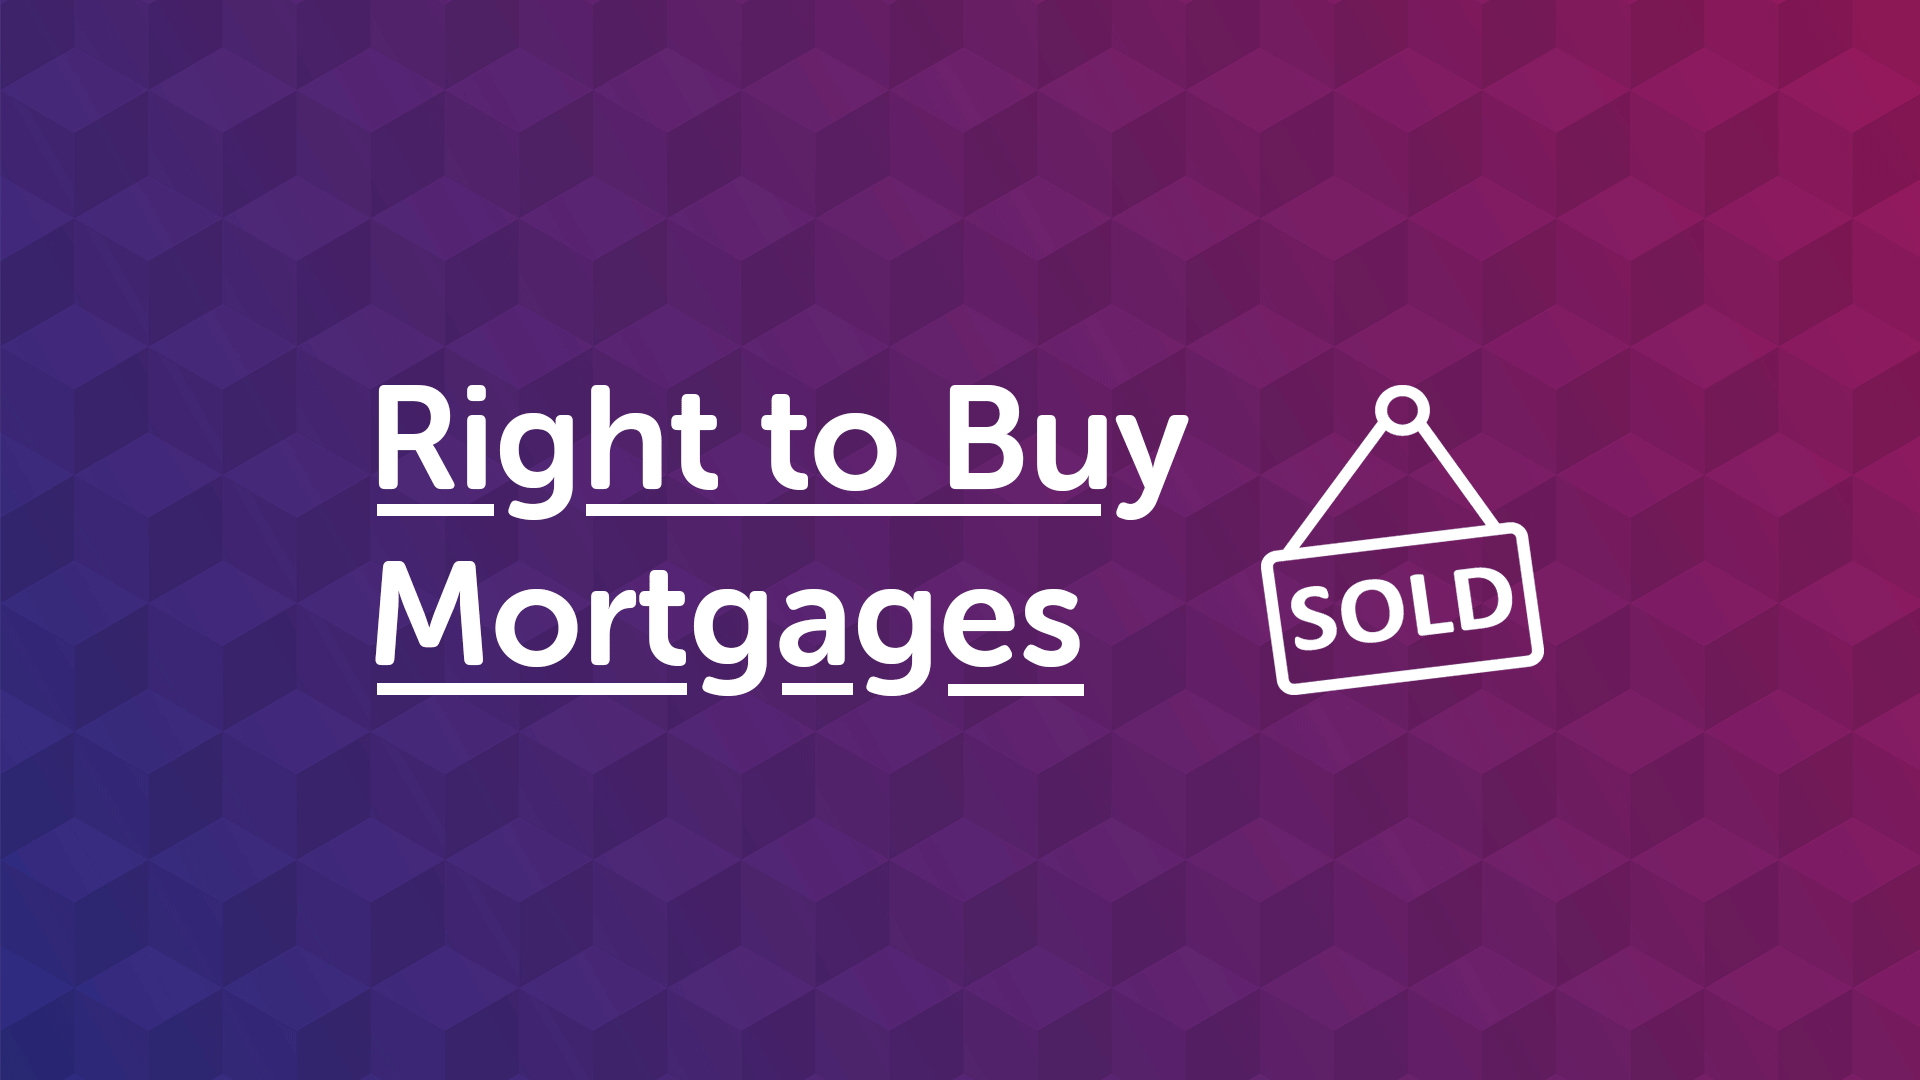 Right To Buy Scheme Mortgage Advice in Leicester